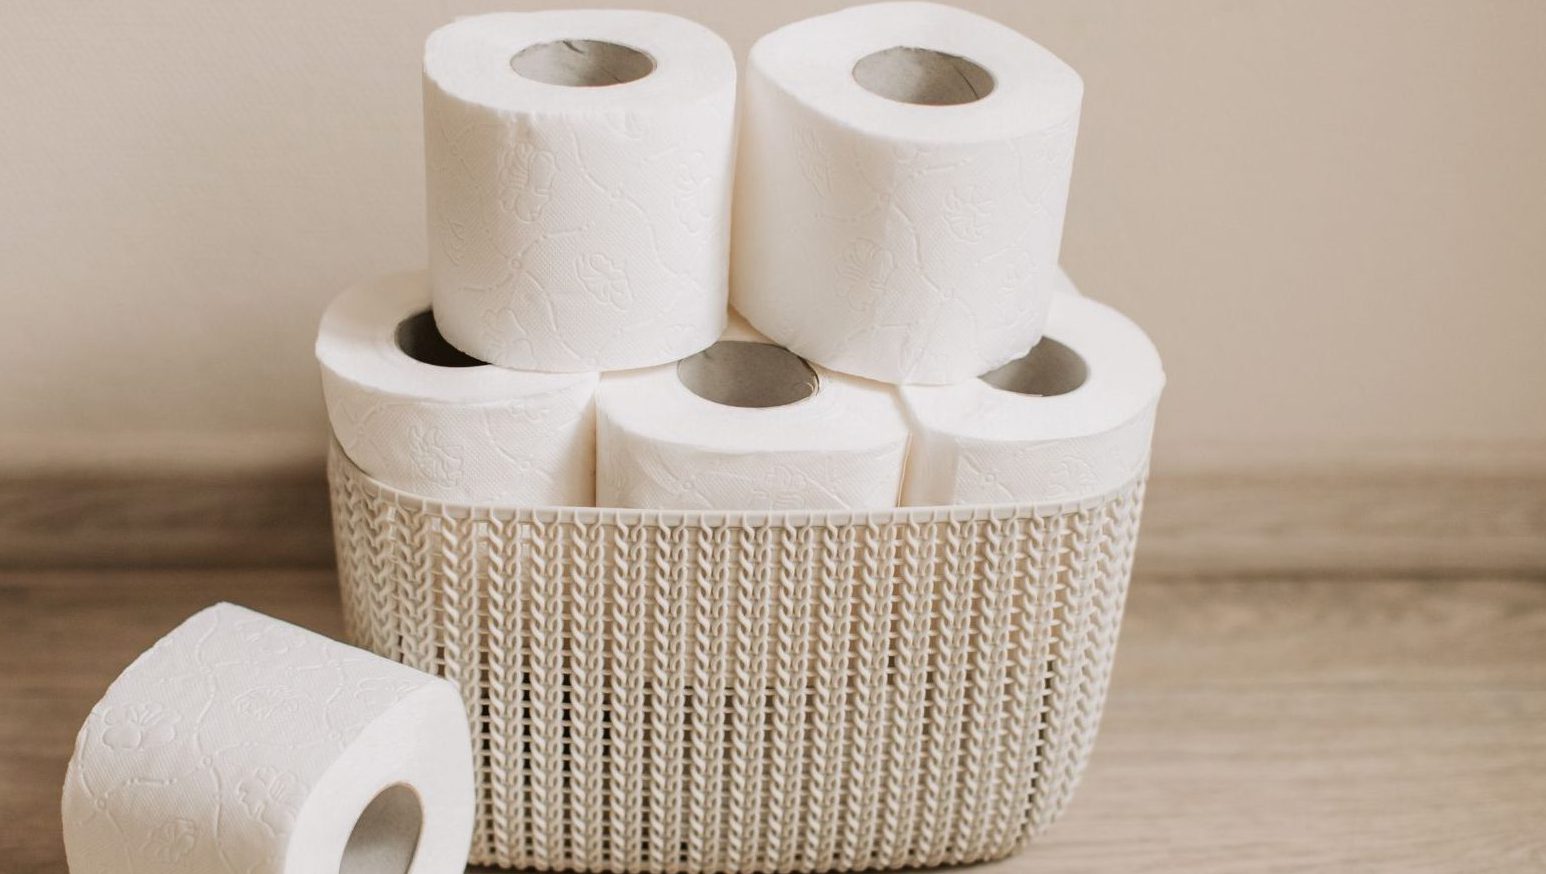 Global Toilet Roll Market Size, Forecasts, And Opportunities